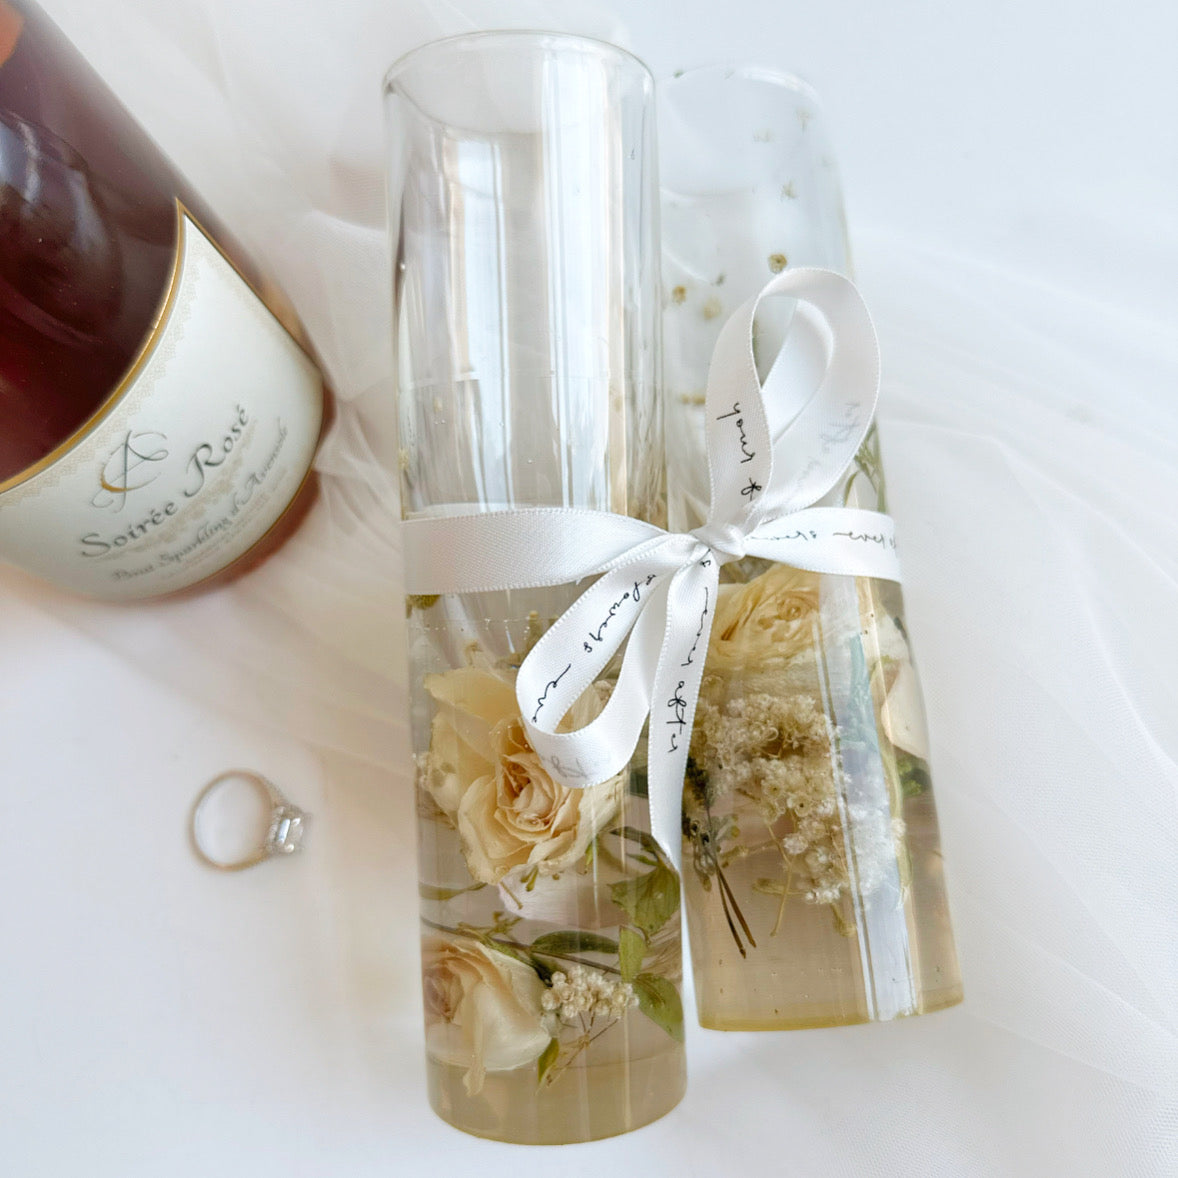 28 Wedding Champagne Flutes Worthy of Your First Toast